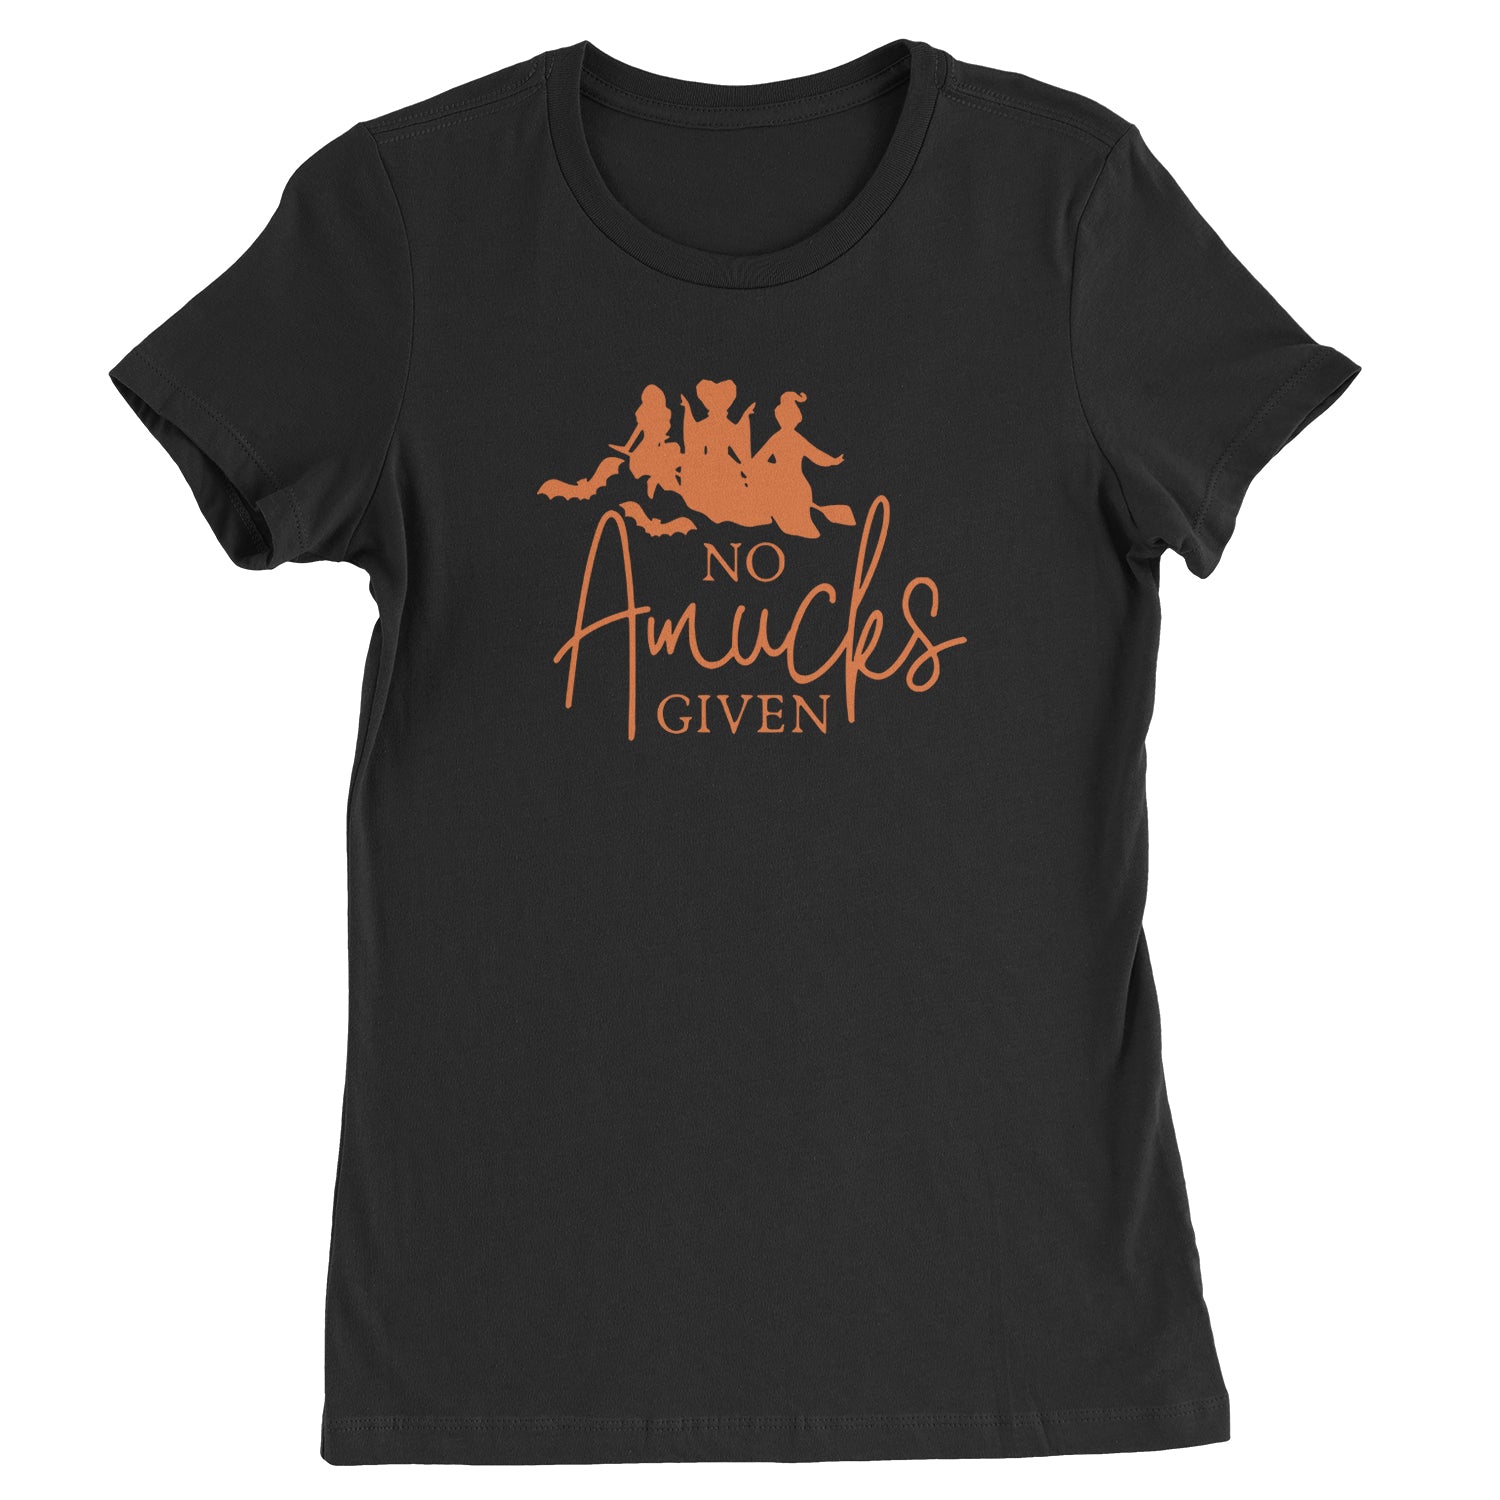 No Amucks Given Hocus Pocus Womens T-shirt descendants, enchanted, eve, hallows, hocus, or, pocus, sanderson, sisters, treat, trick, witches by Expression Tees